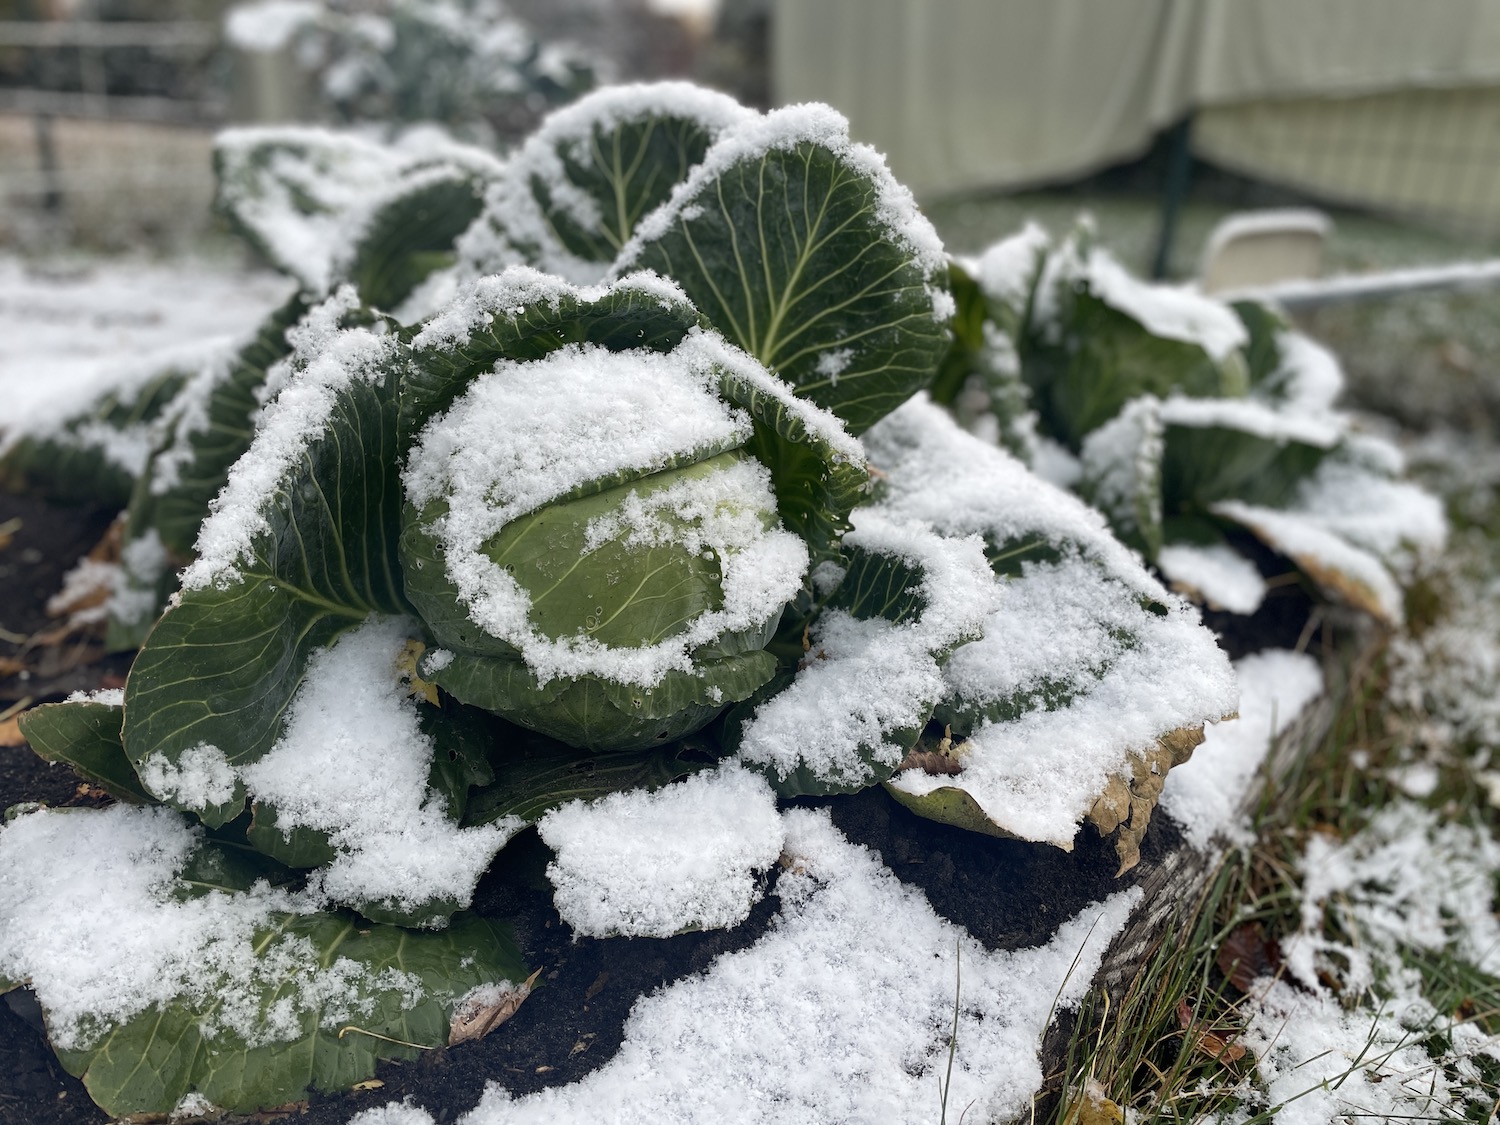 A photo of cabbage plants under some snow in the winter